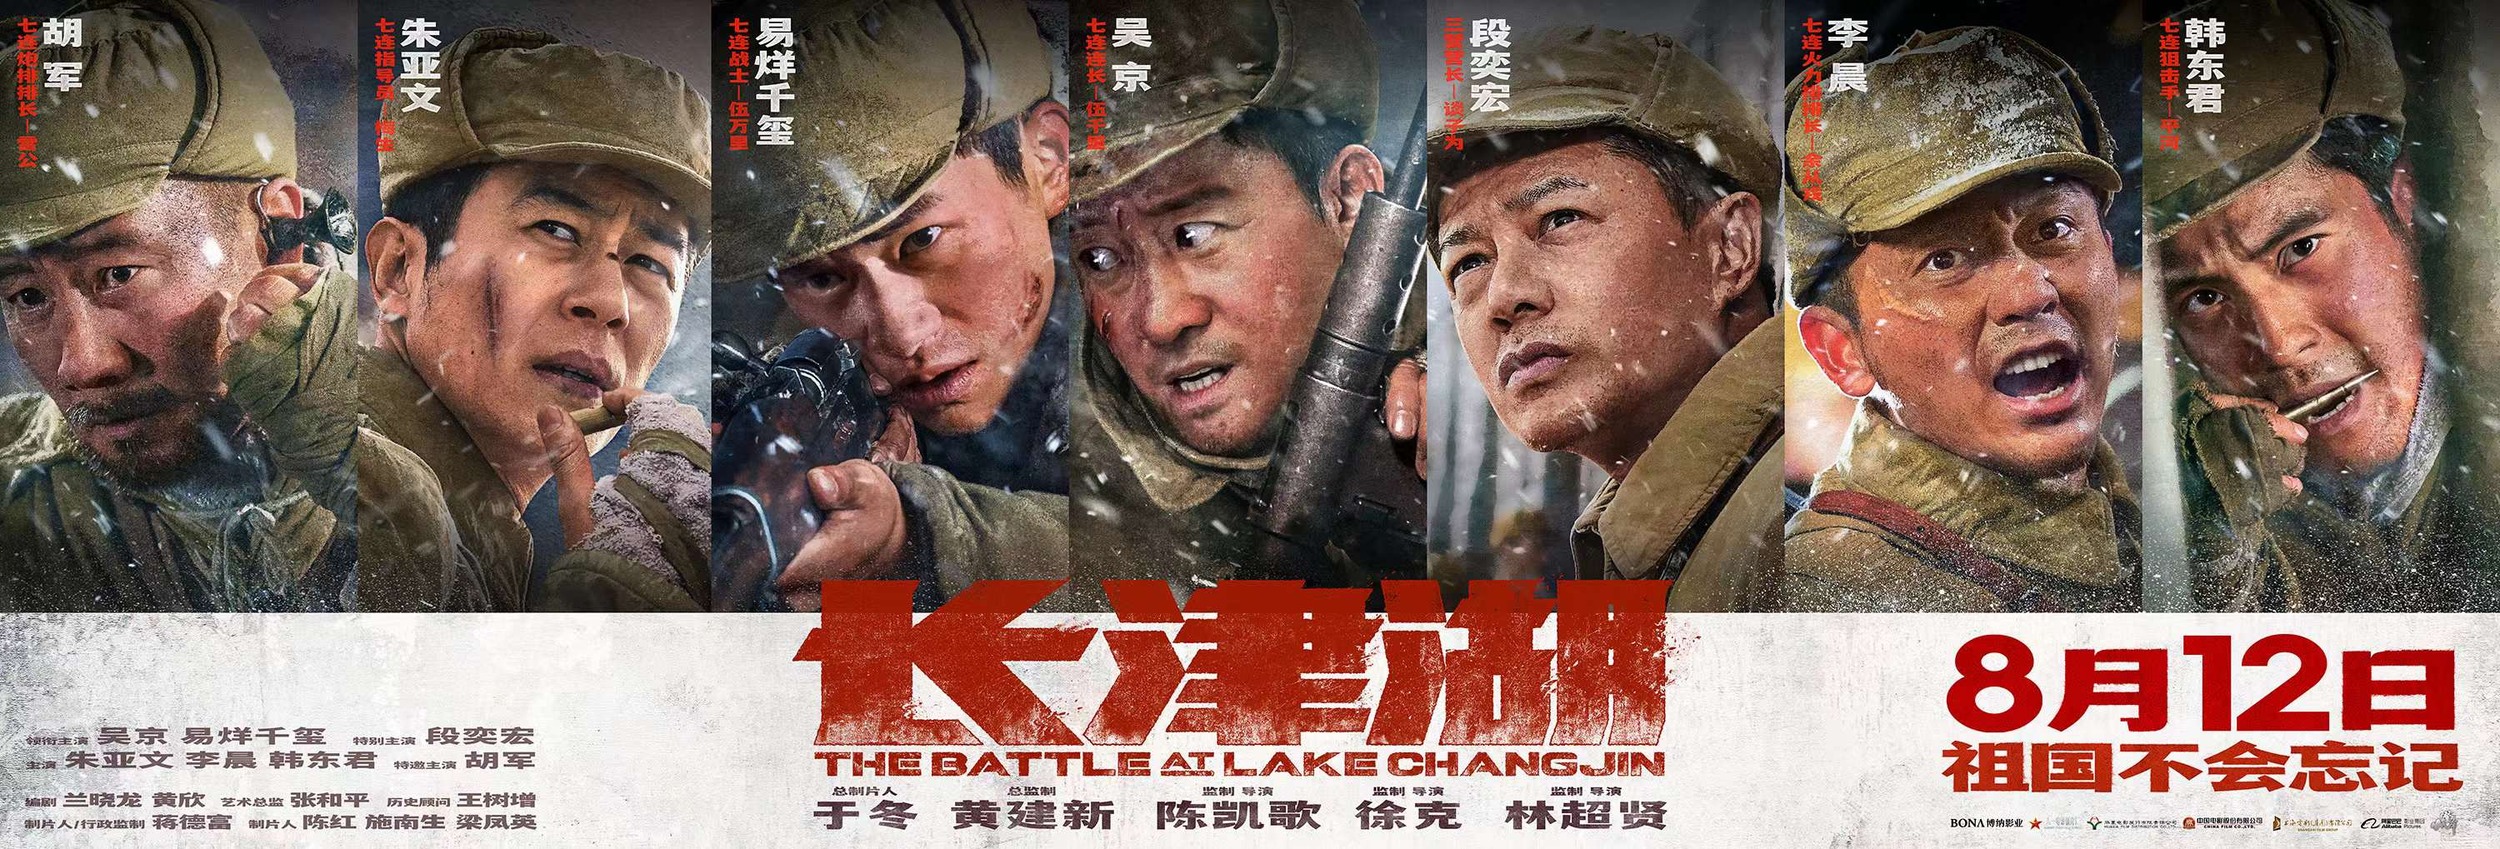 Mega Sized Movie Poster Image for The Battle at Lake Changjin (#3 of 24)